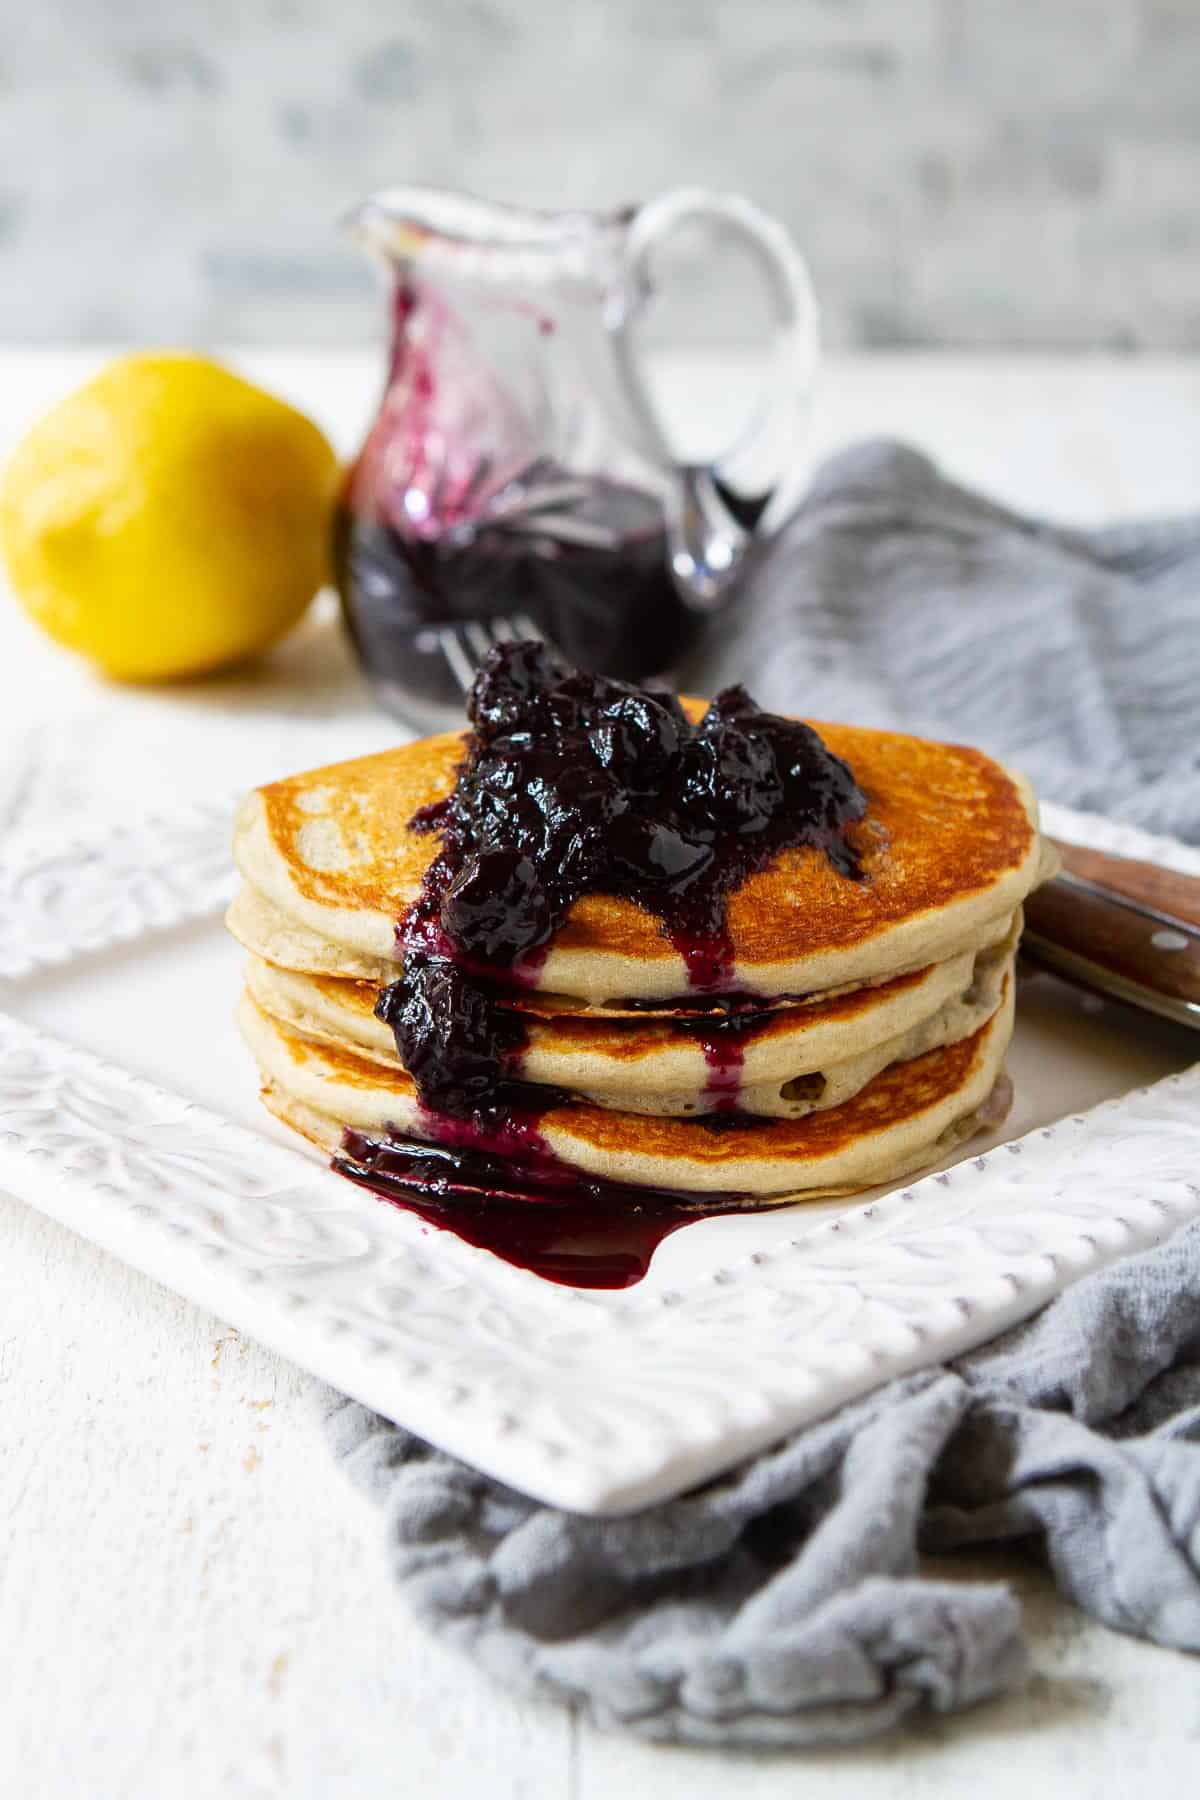 Blueberry lemon pancakes on a white plate, topped with blueberry syrup. Pitcher of blueberry syrup behind.